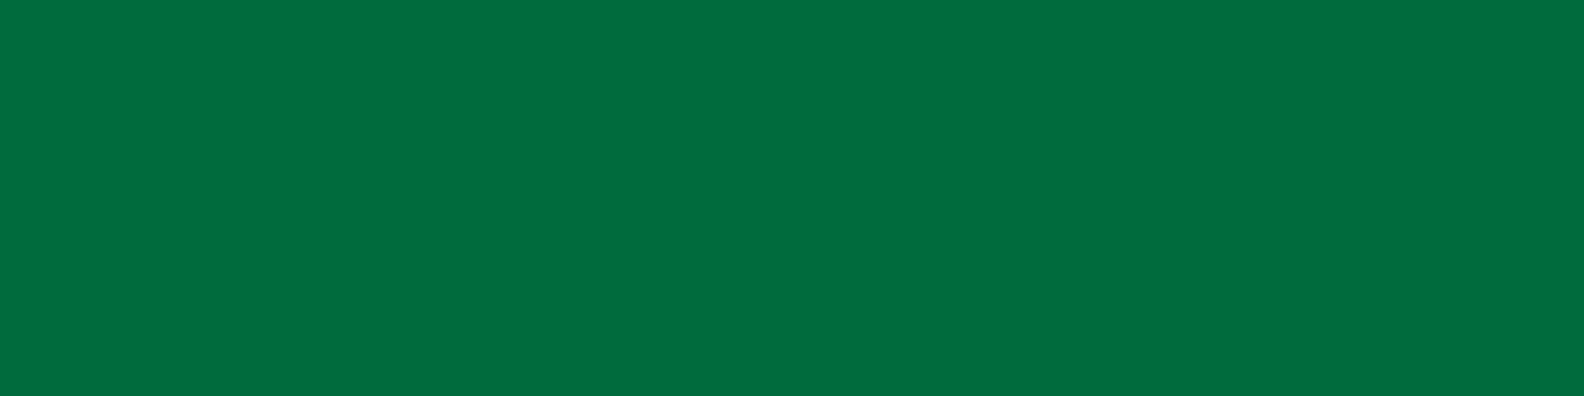 1584x396 Cadmium Green Solid Color Background